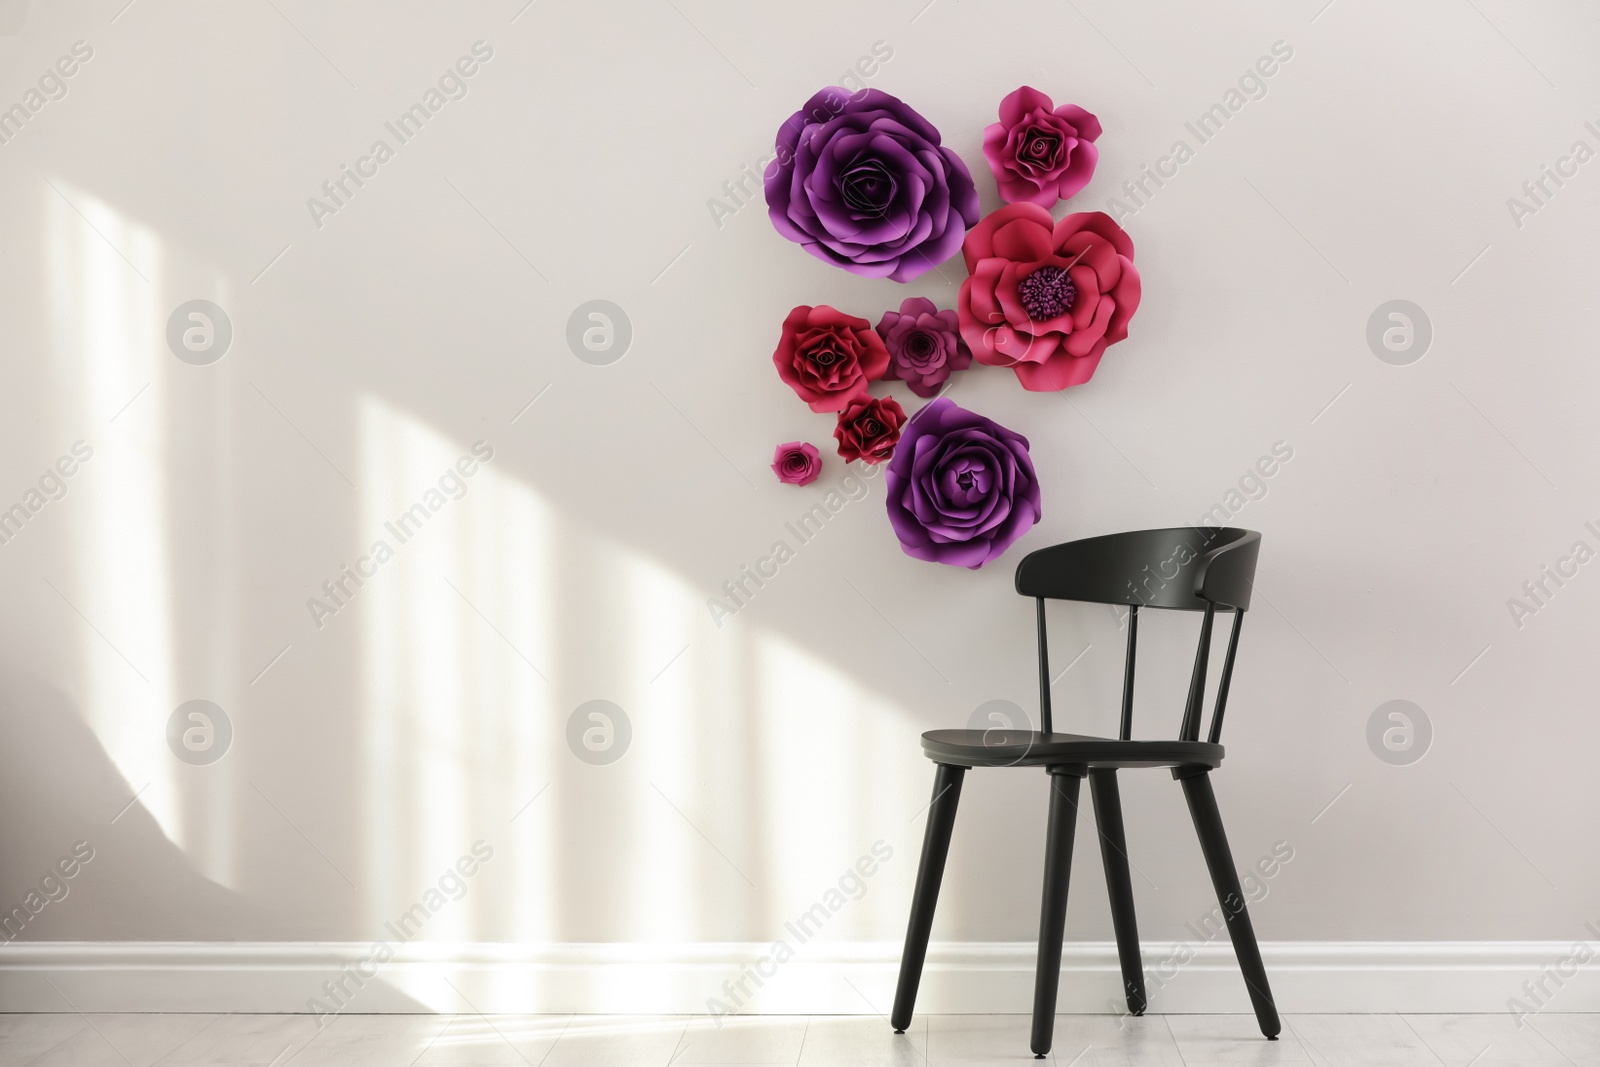 Photo of Stylish room interior with floral decor and black chair, space for text